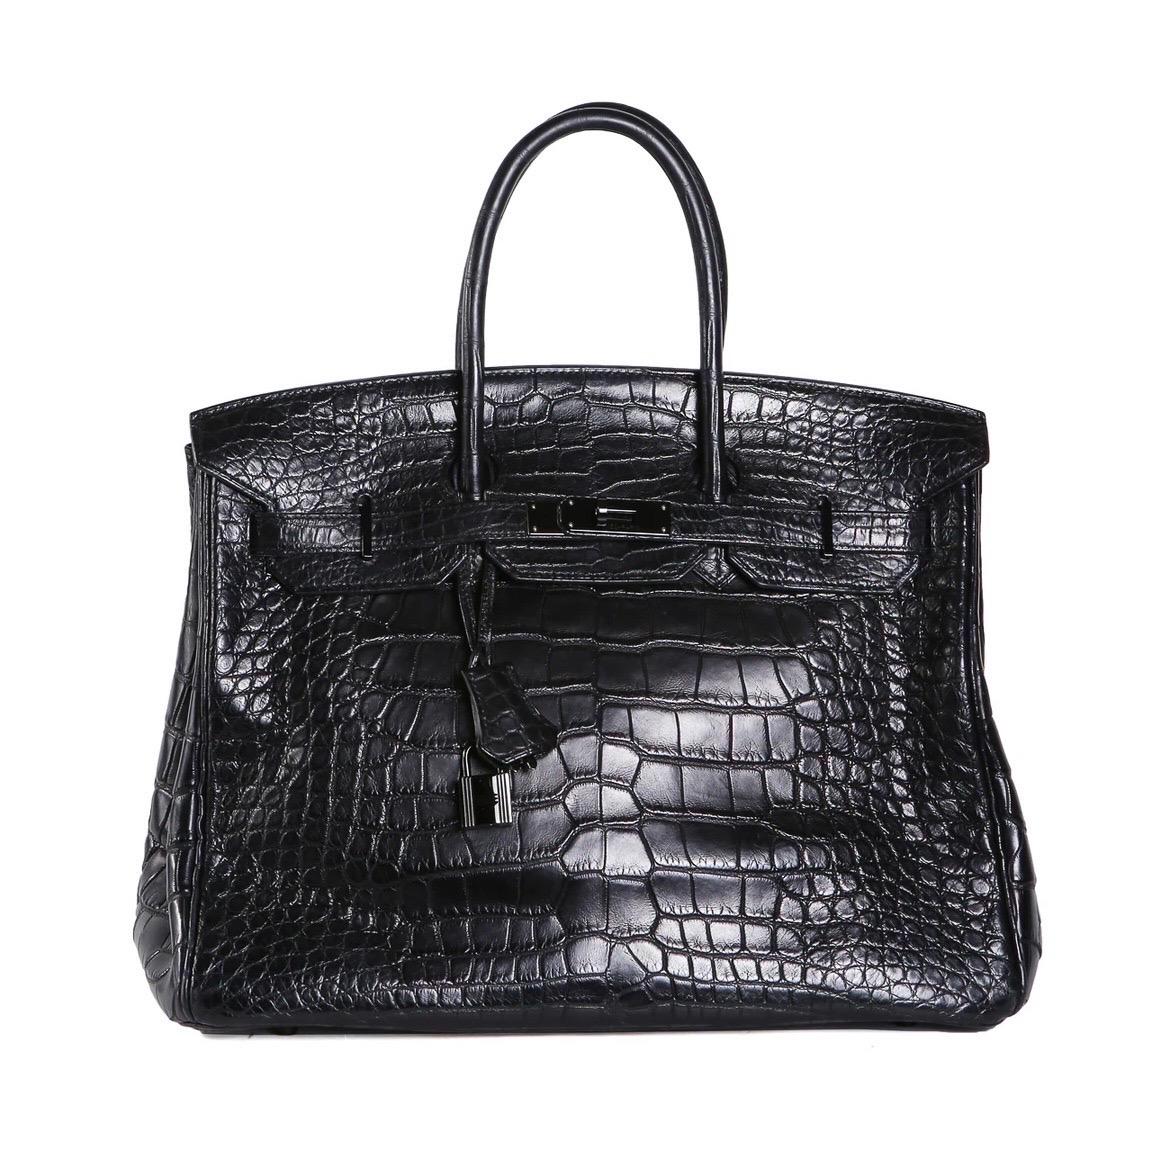 Birkin bag by Hermes from 2011
Only 3 others produced
Black crocodile leather with shiny gunmetal hardware
Lock and key included
Dimensions:  14